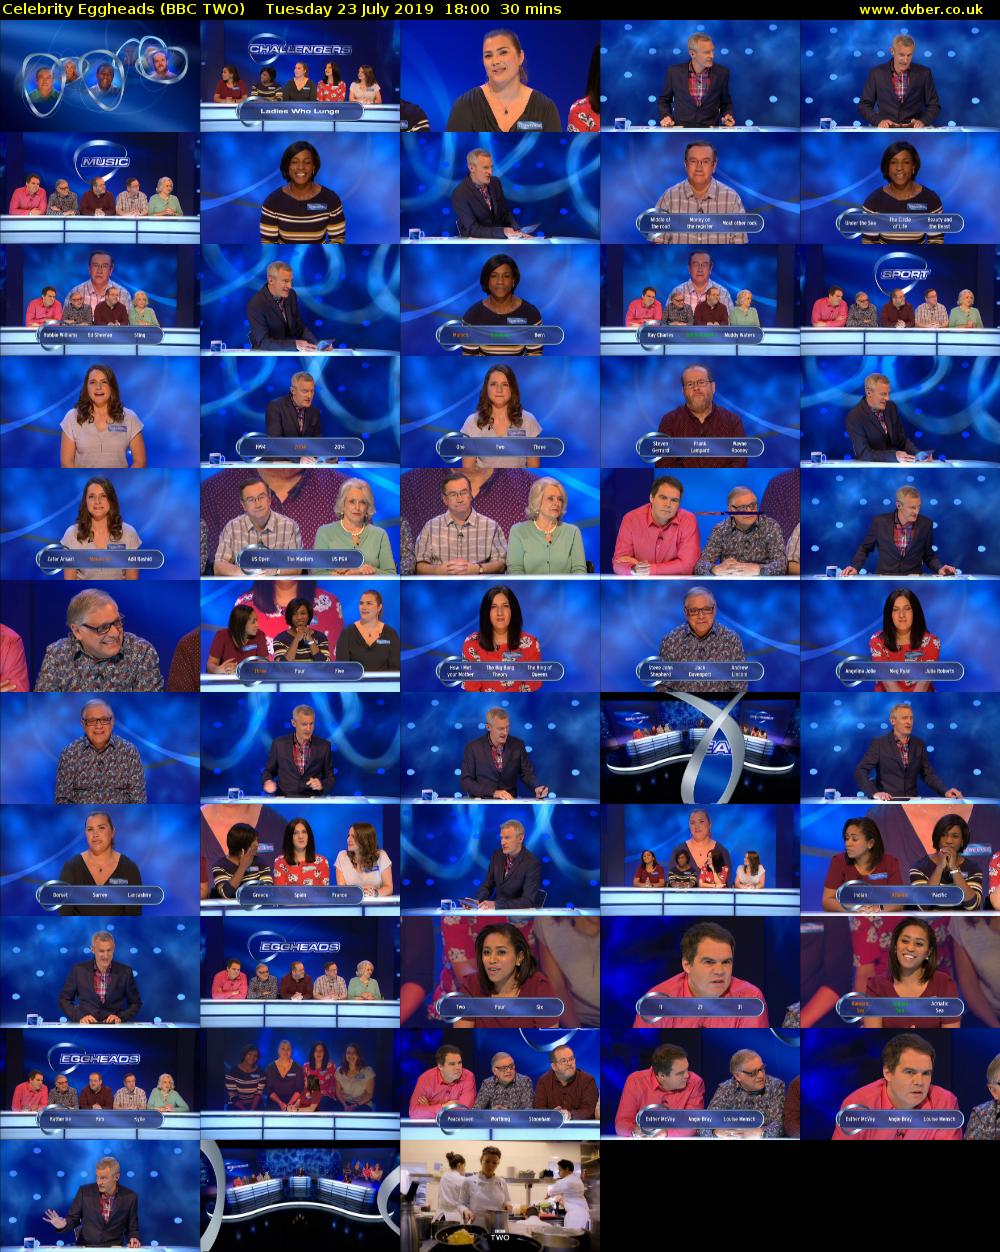 Celebrity Eggheads (BBC TWO) Tuesday 23 July 2019 18:00 - 18:30